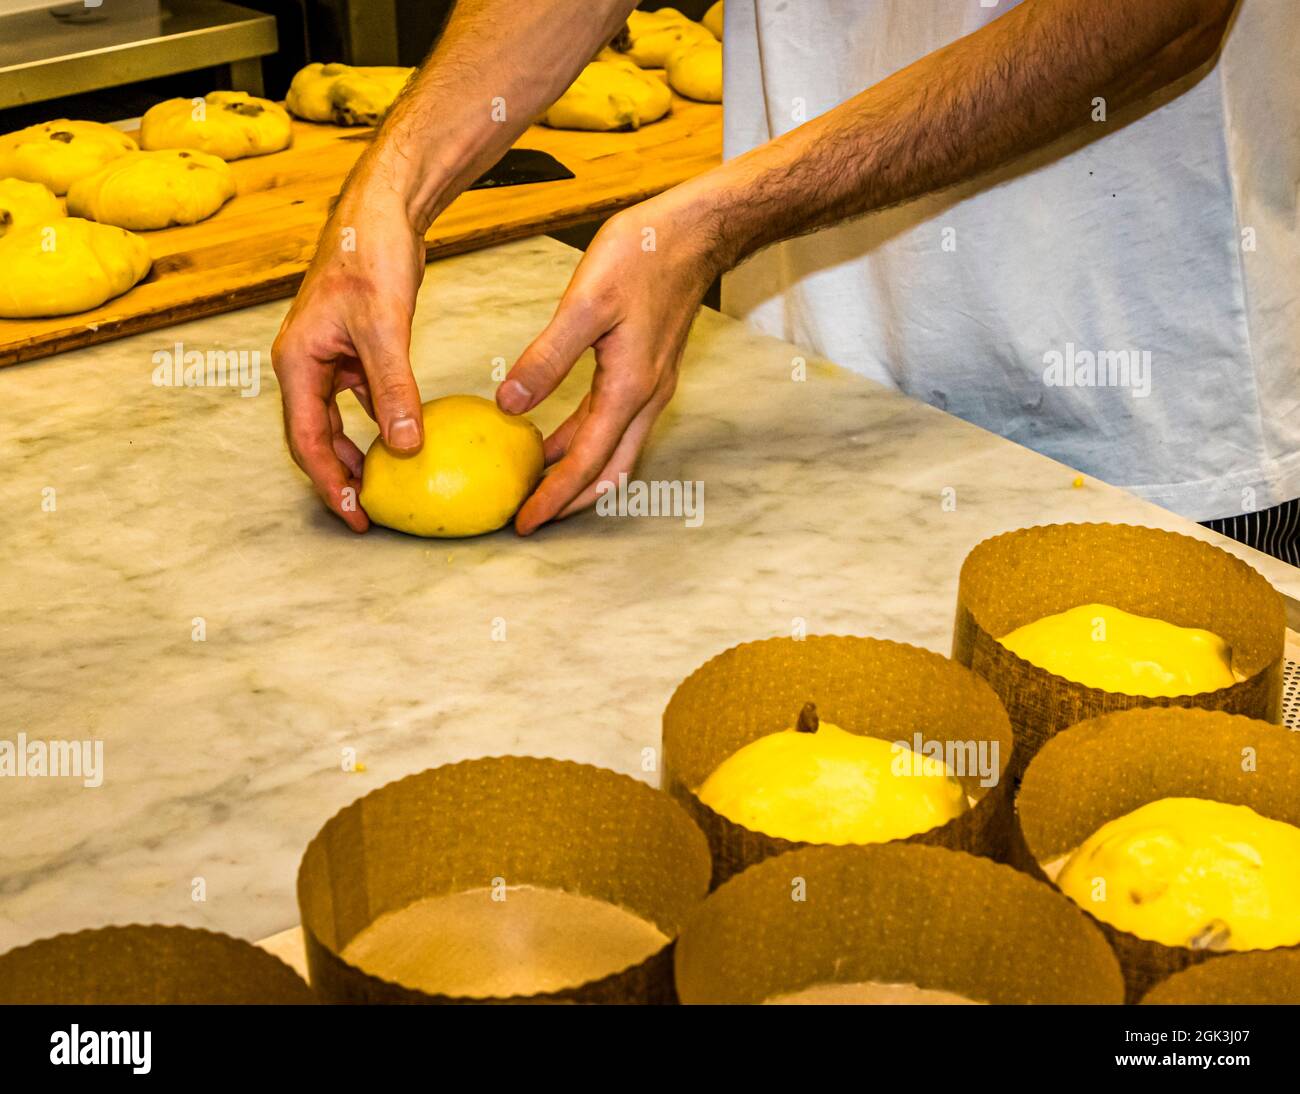 Off into the mould. After the board rest, the dough pieces are shaped by hand one more time and placed in the cuffs typical of panettone. Panettone Prduction in the Pasticceria Marnin in Locarno, Switzerland. Circolo di Locarno, Switzerland Stock Photo